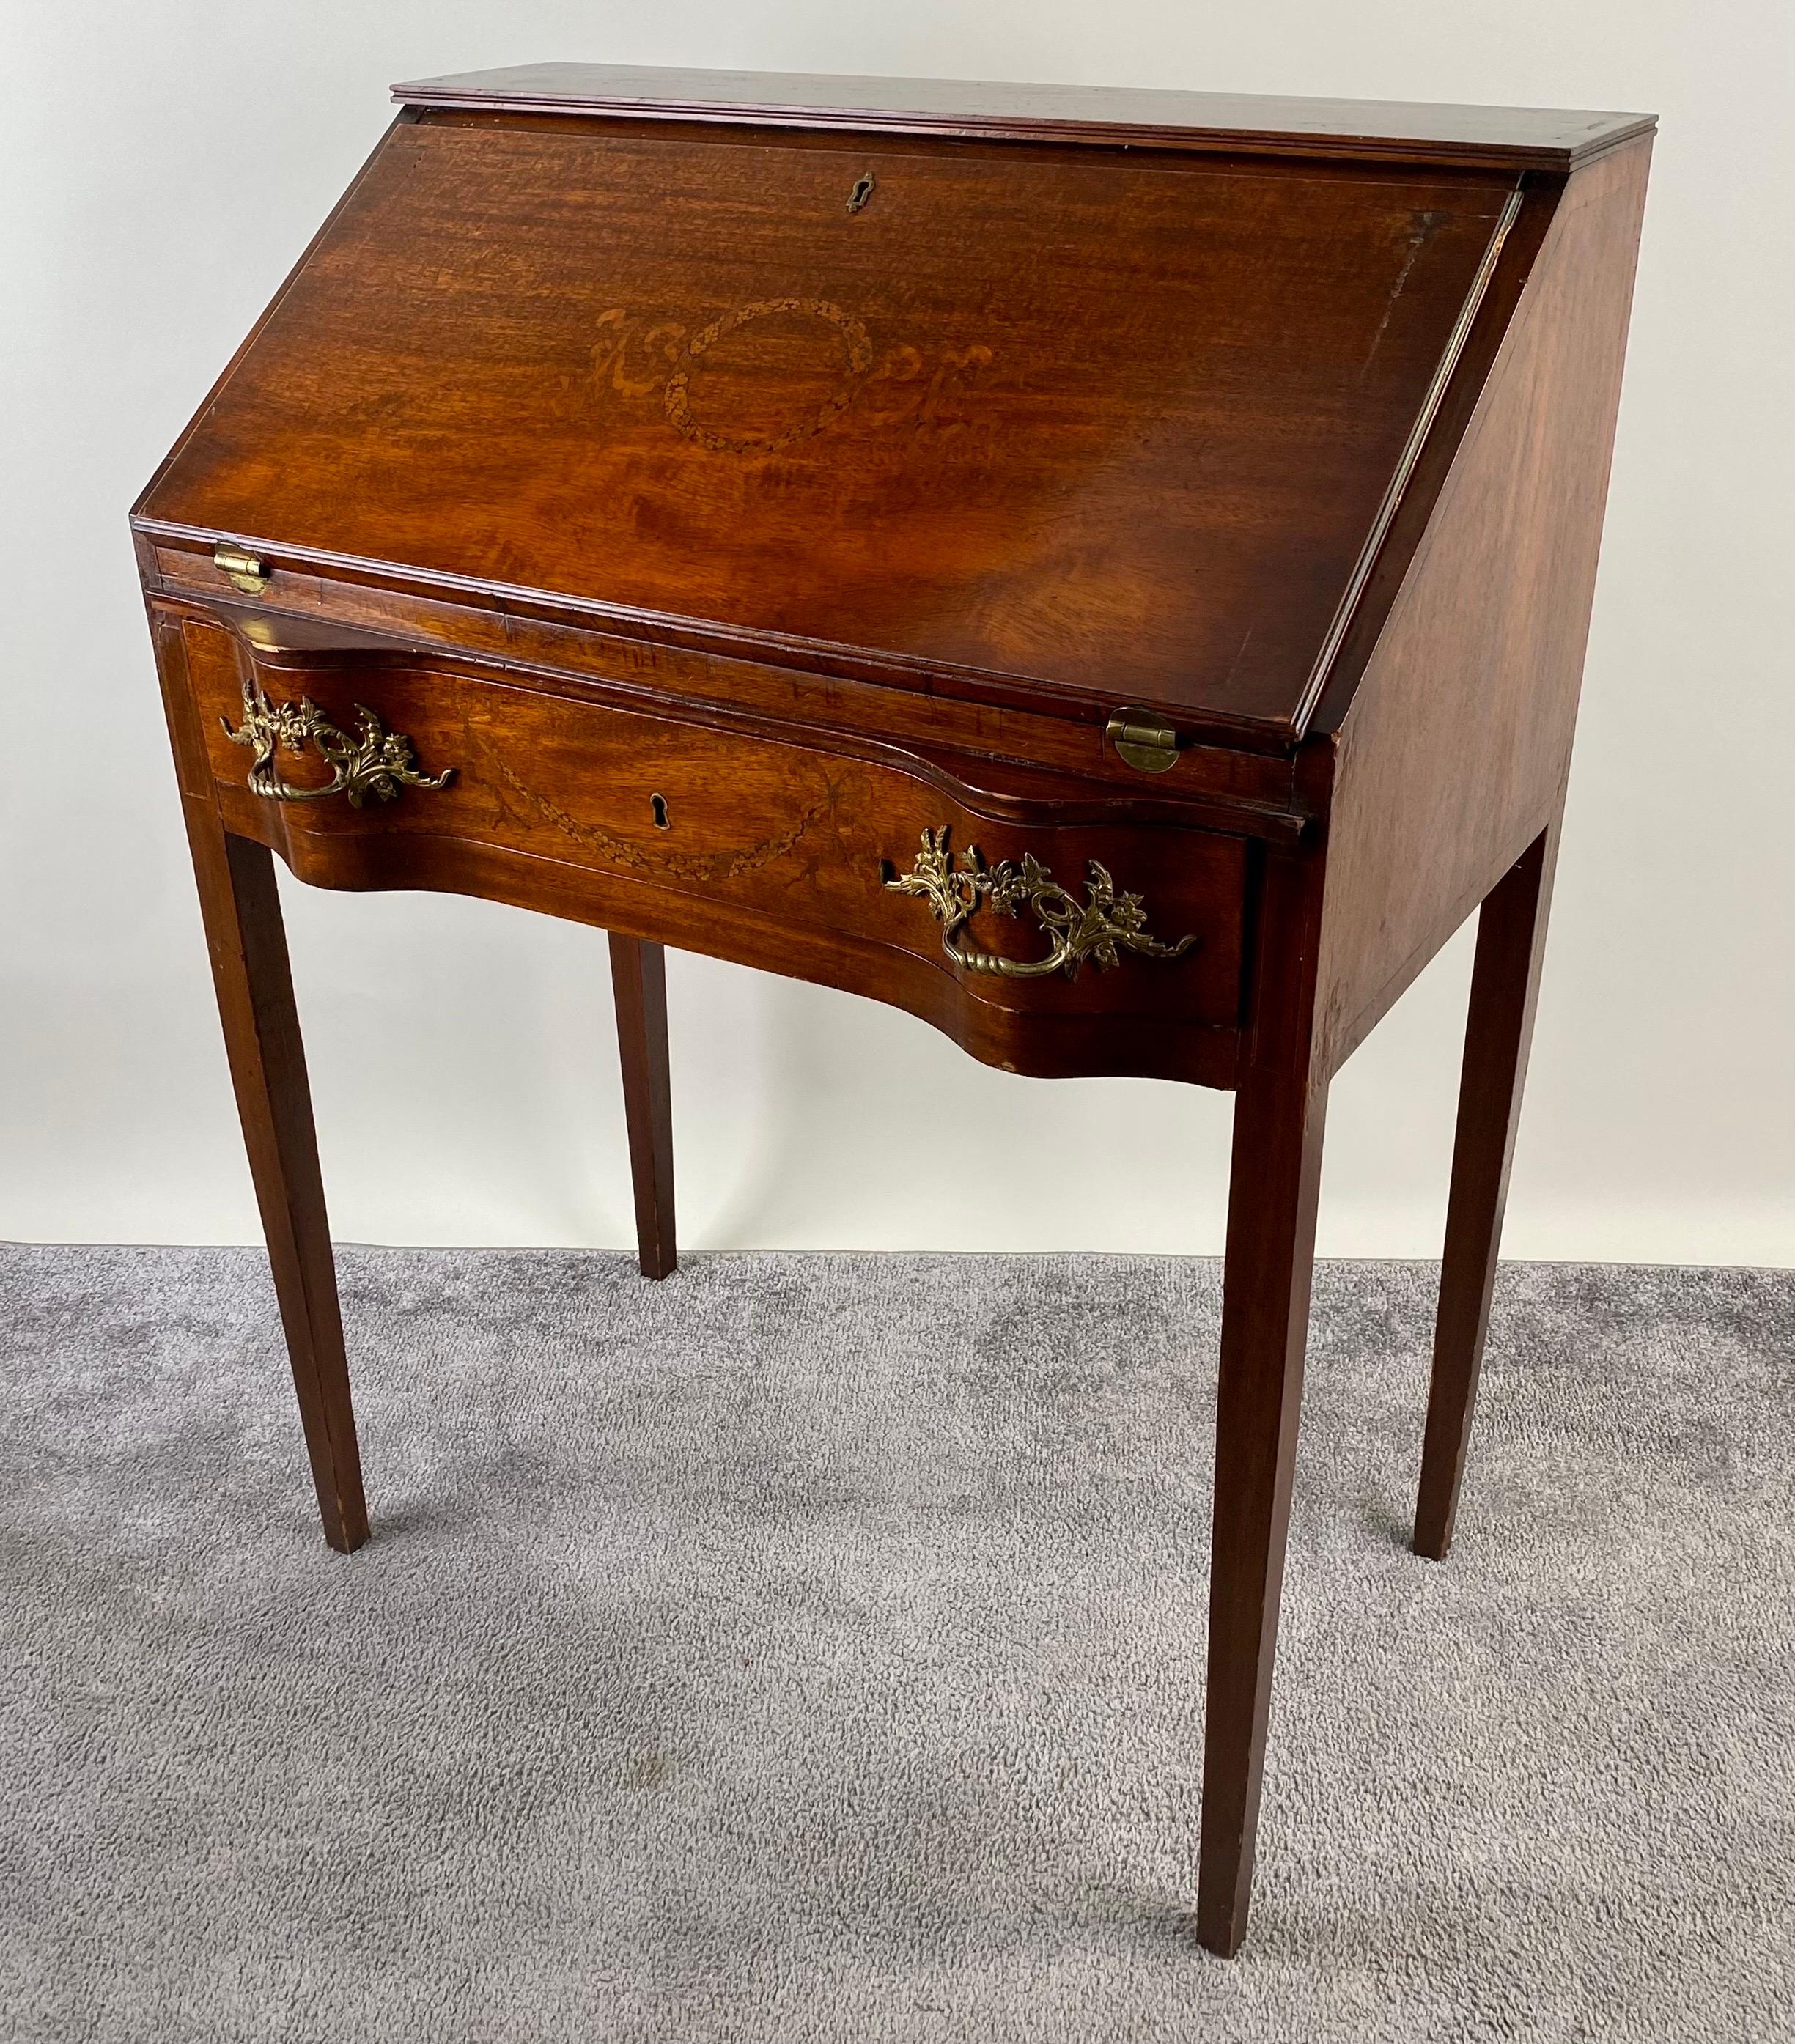 An antique English Edwardian slant front writing desk, a true embodiment of the refined craftsmanship of the early 1900s. Crafted from rich mahogany, the focal point of this masterpiece lies in the intricate marquetry inlay gracing the drop-front of